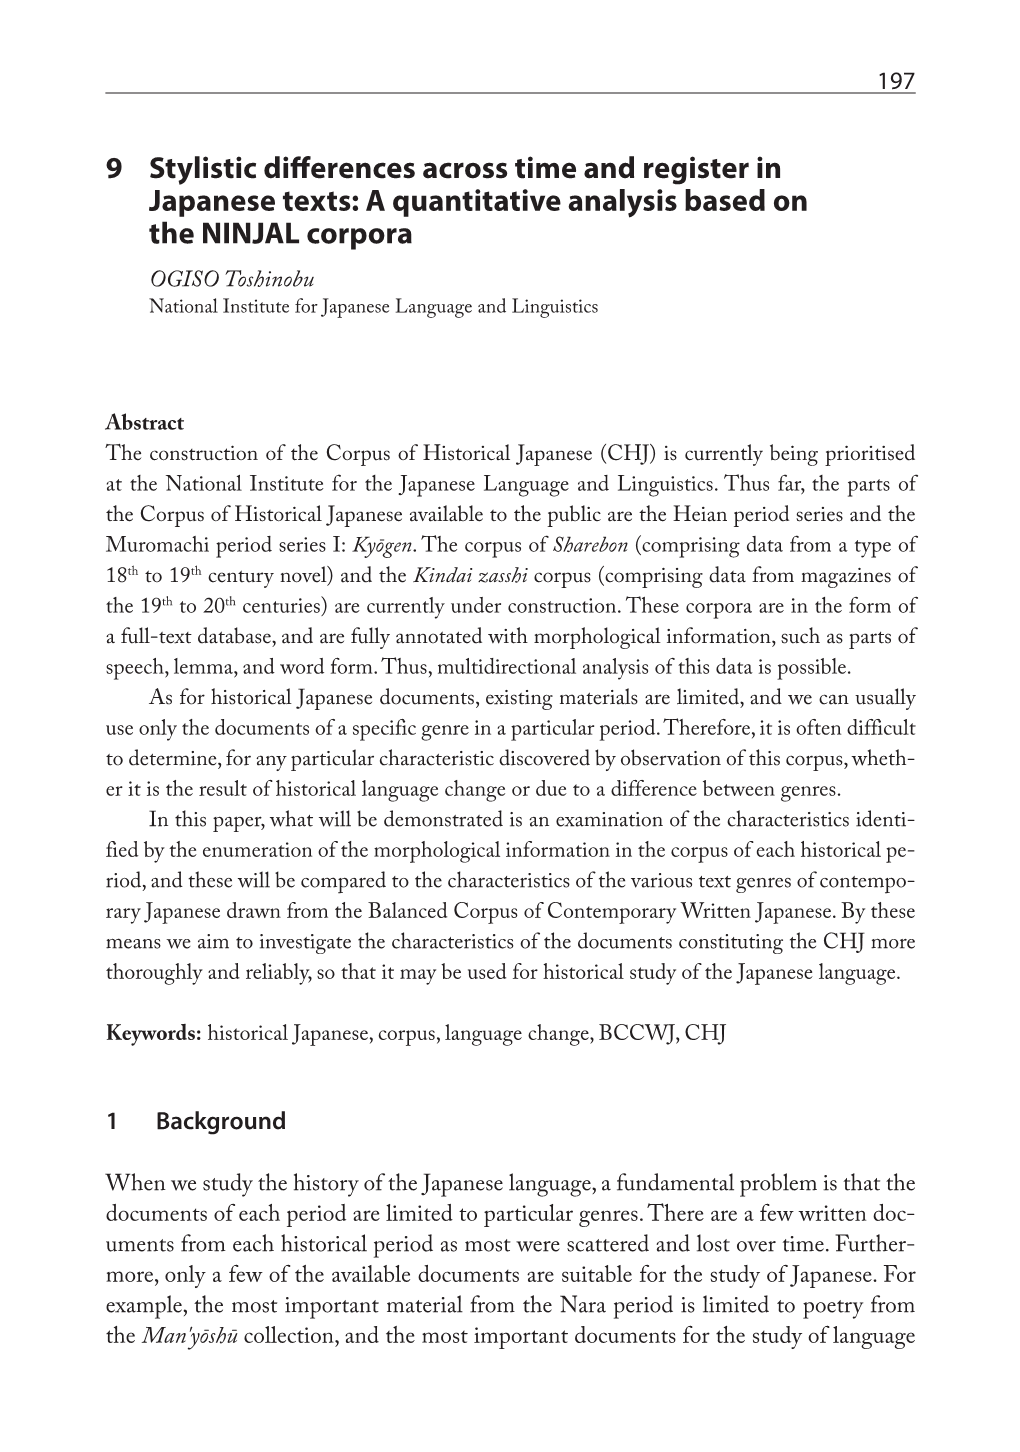 9 Stylistic Differences Across Time and Register in Japanese Texts: a Quantitative Analysis Based on the NINJAL Corpora